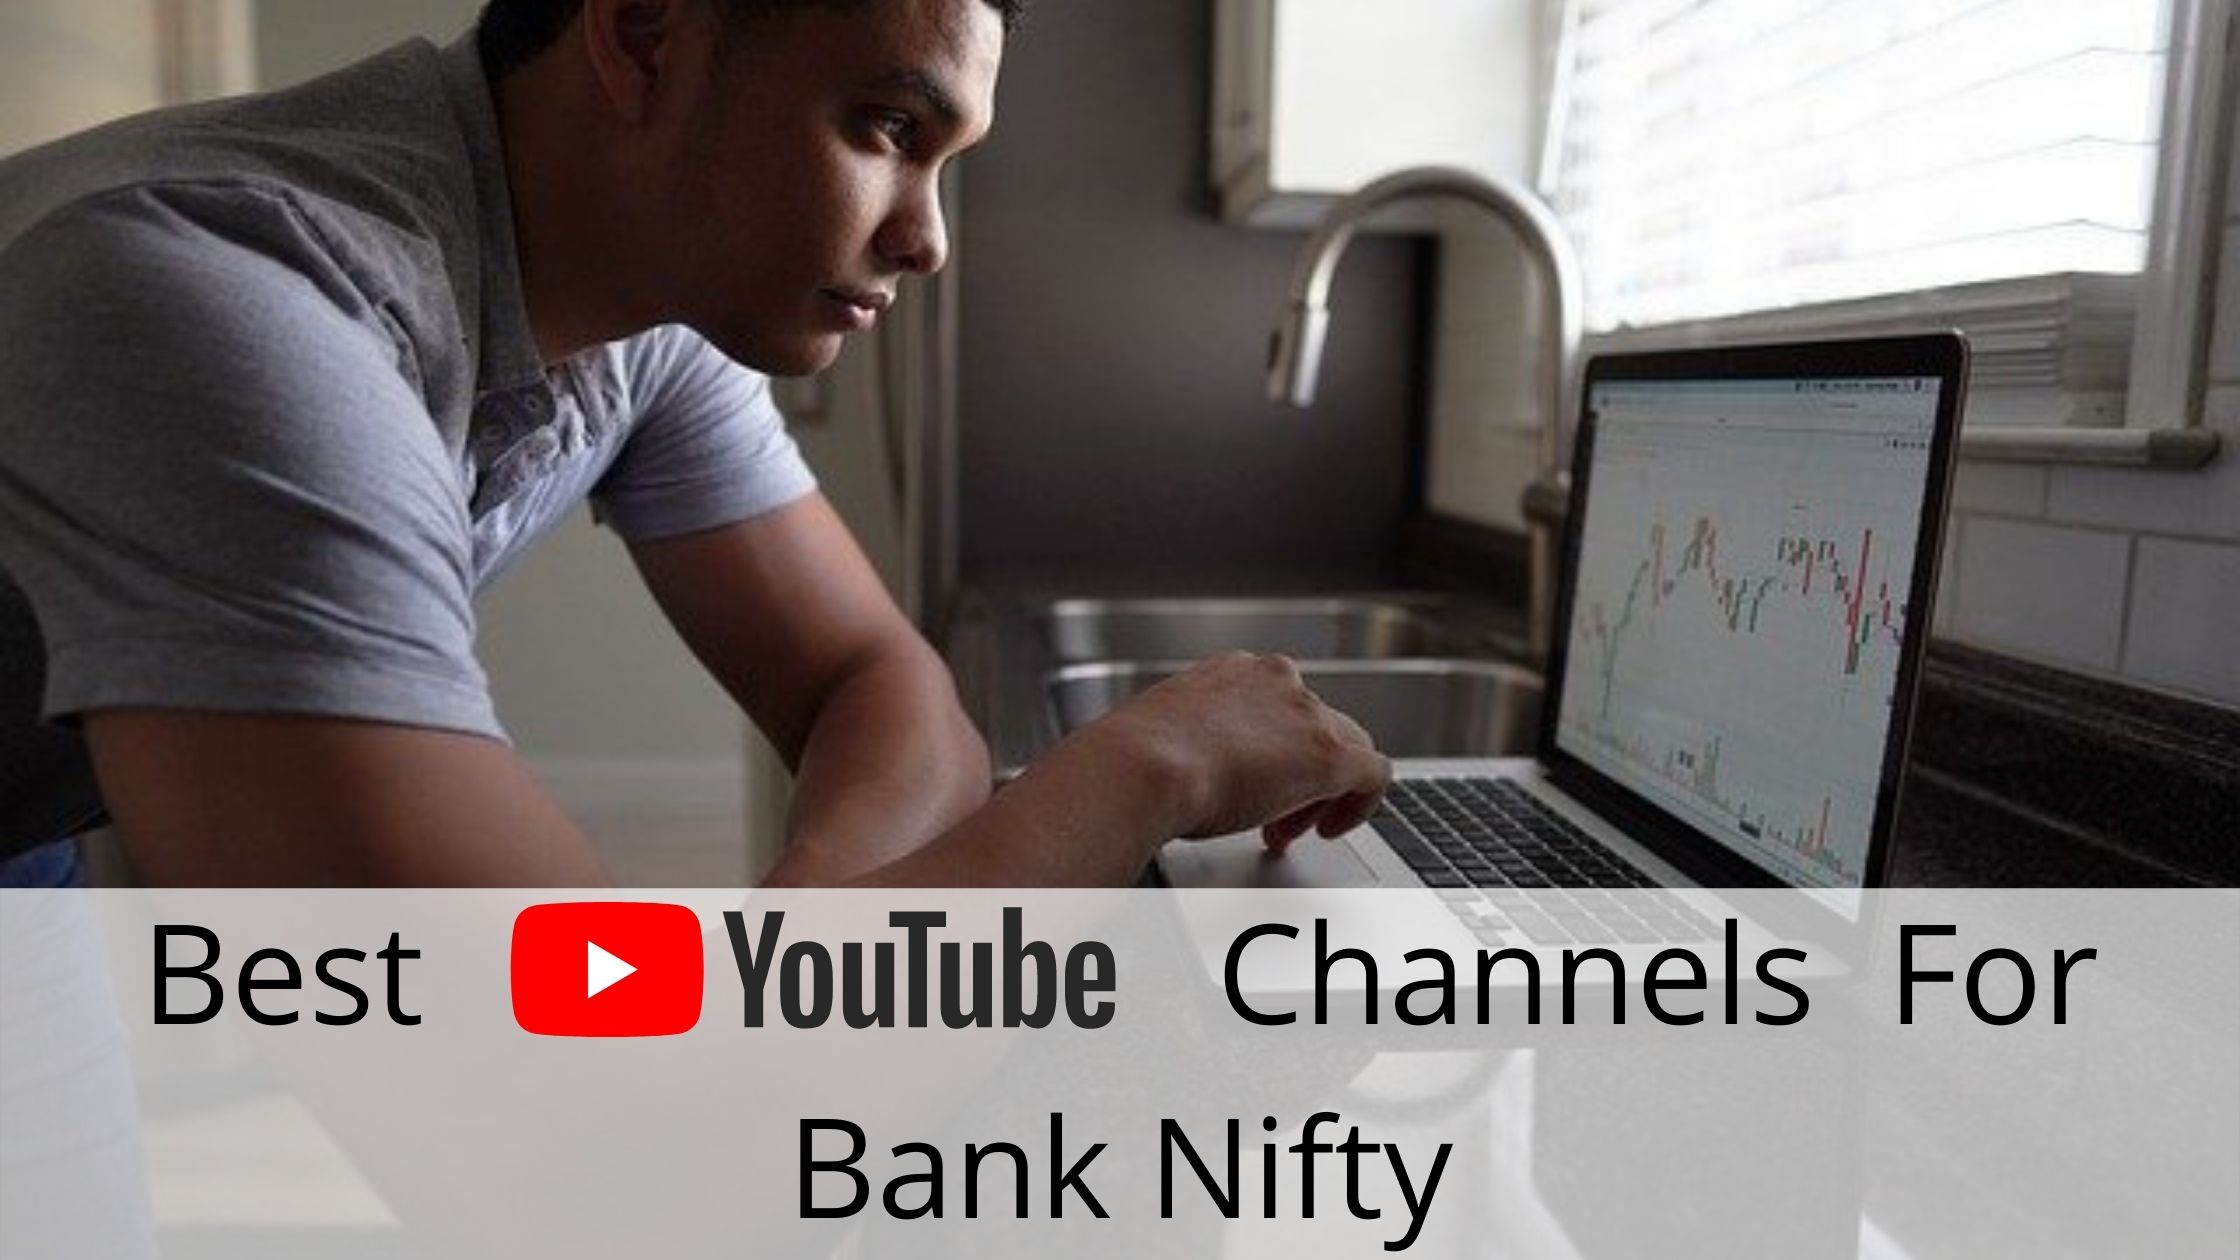 Best YouTube Channels For BankNifty